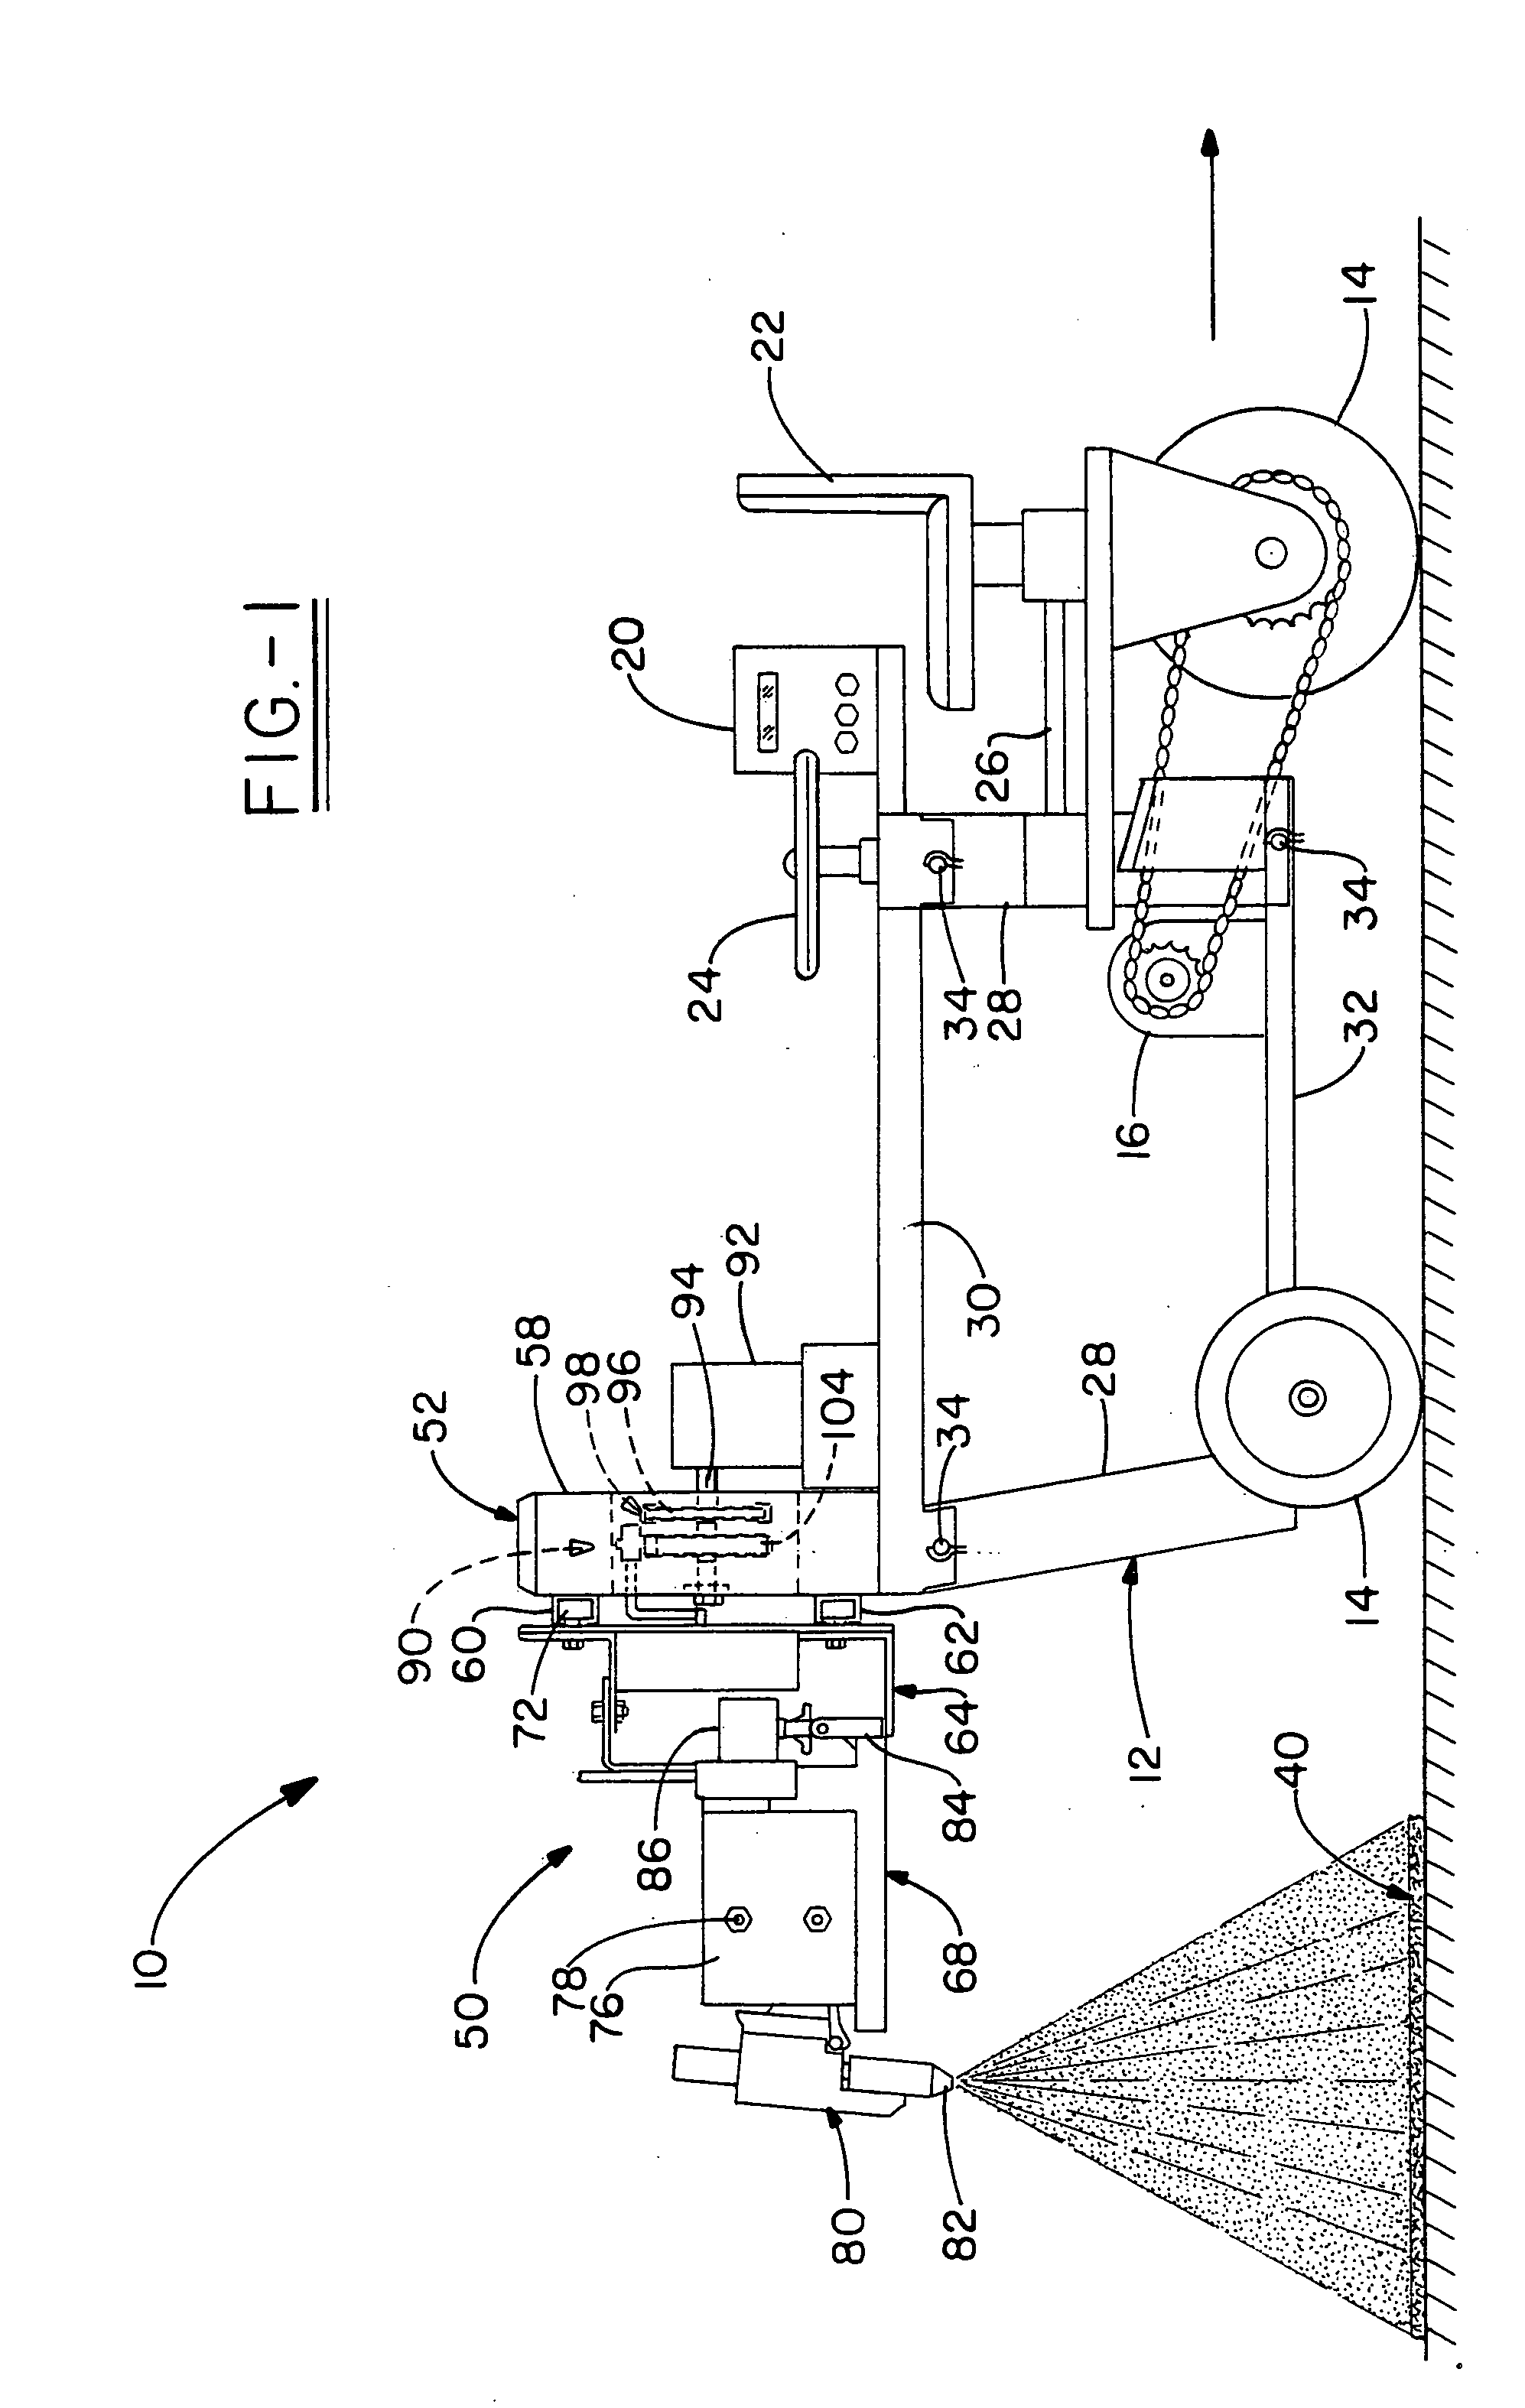 Apparatus for applying a coating to a roof or other substrate